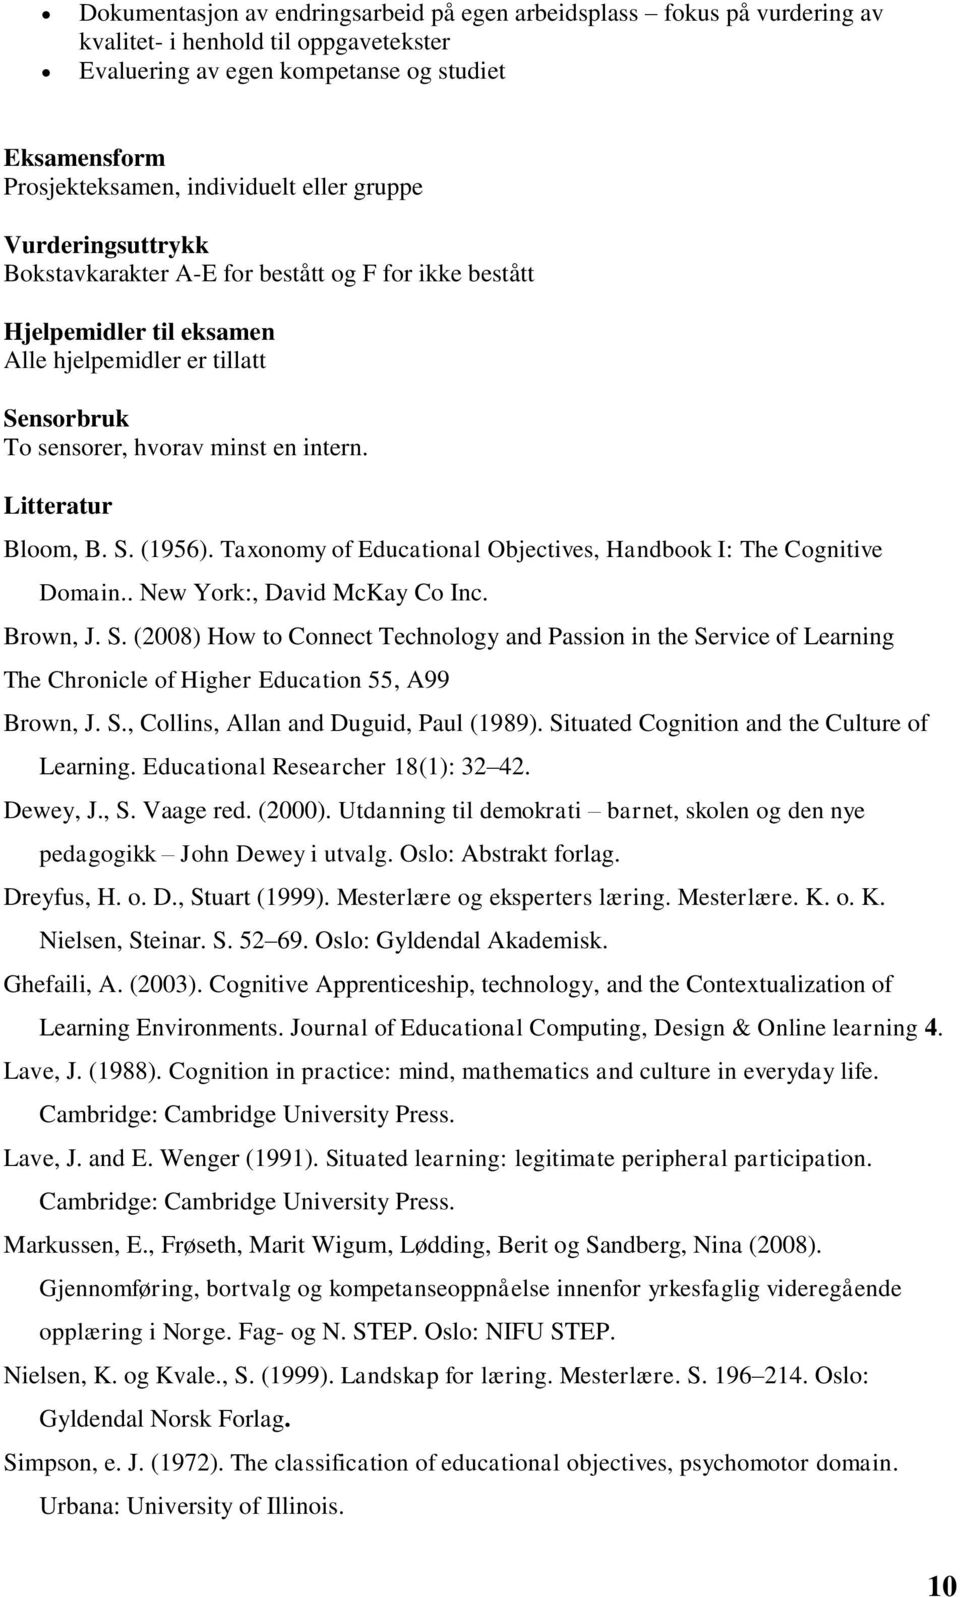 Litteratur Bloom, B. S. (1956). Taxonomy of Educational Objectives, Handbook I: The Cognitive Domain.. New York:, David McKay Co Inc. Brown, J. S. (2008) How to Connect Technology and Passion in the Service of Learning The Chronicle of Higher Education 55, A99 Brown, J.